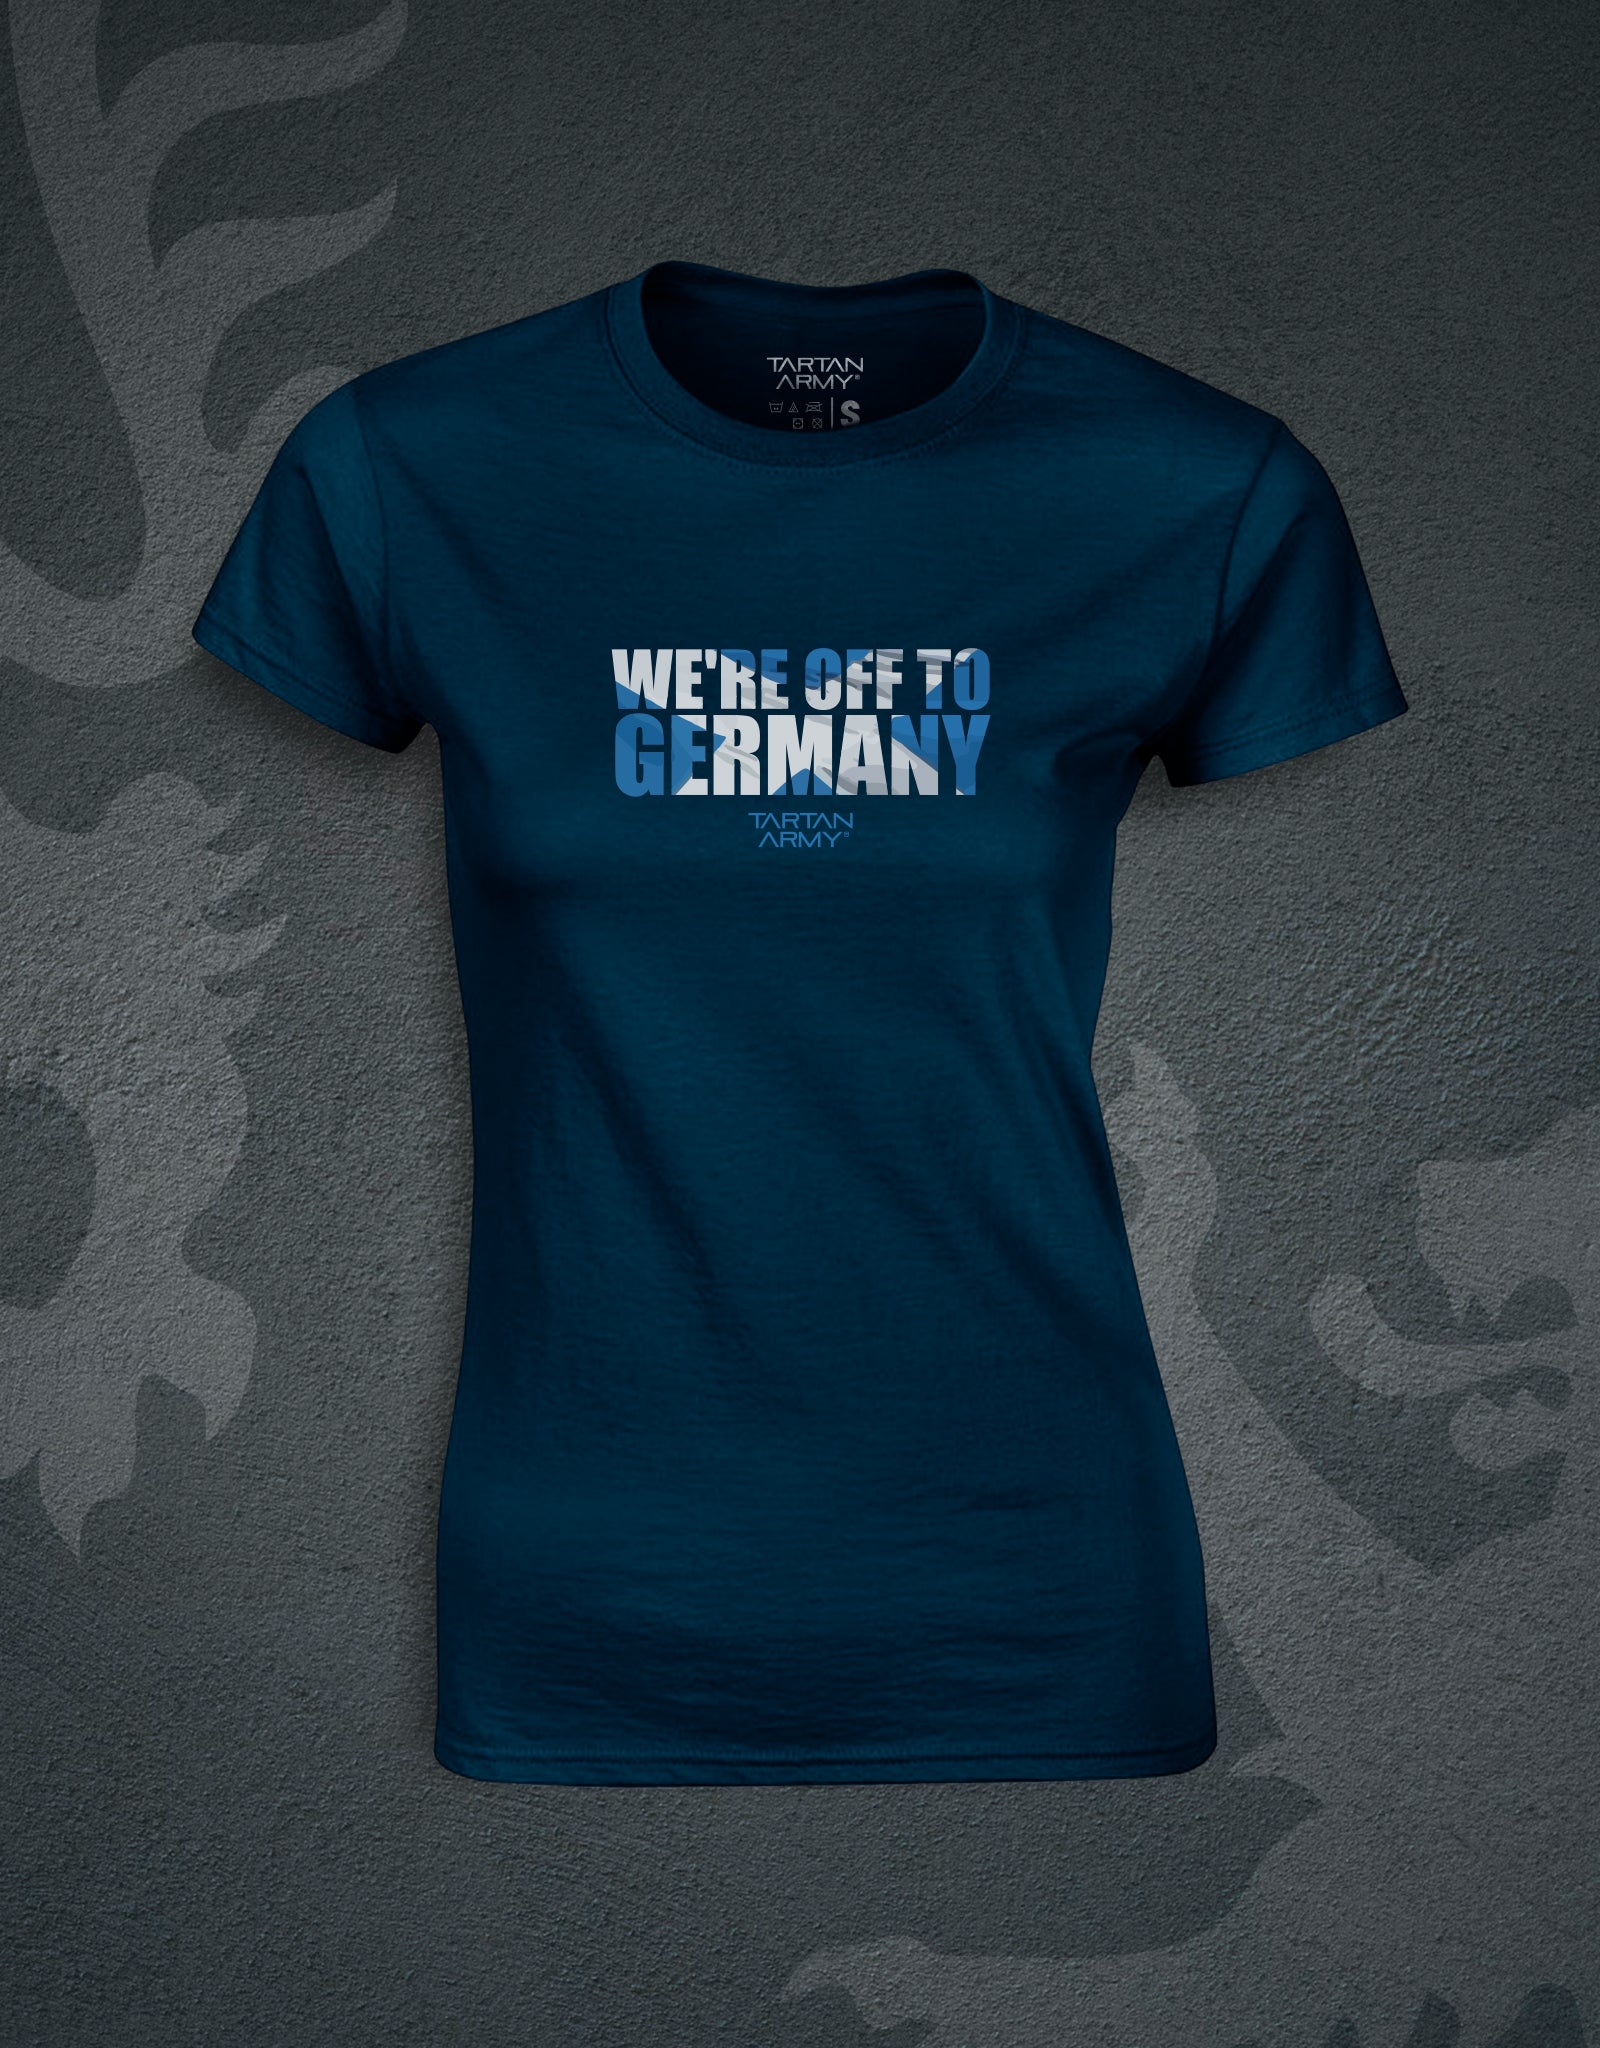 We're Off To Germany Fitted T-Shirt | Official Tartan Army Store